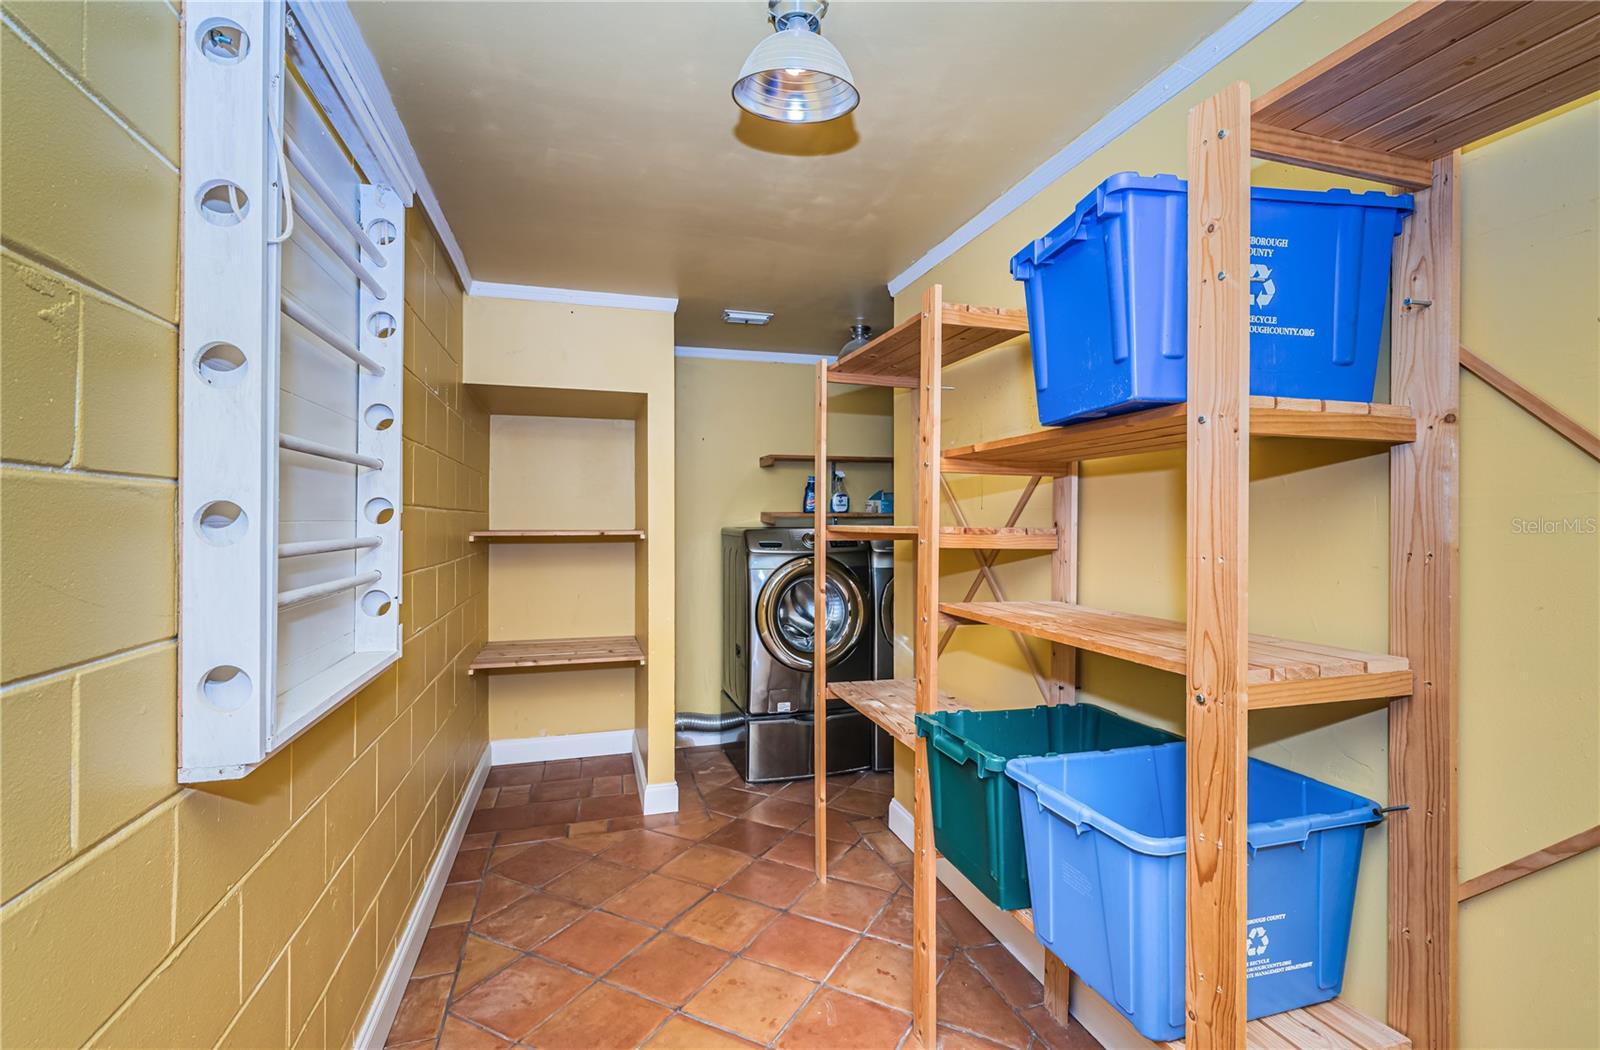 Utility room with so much storage